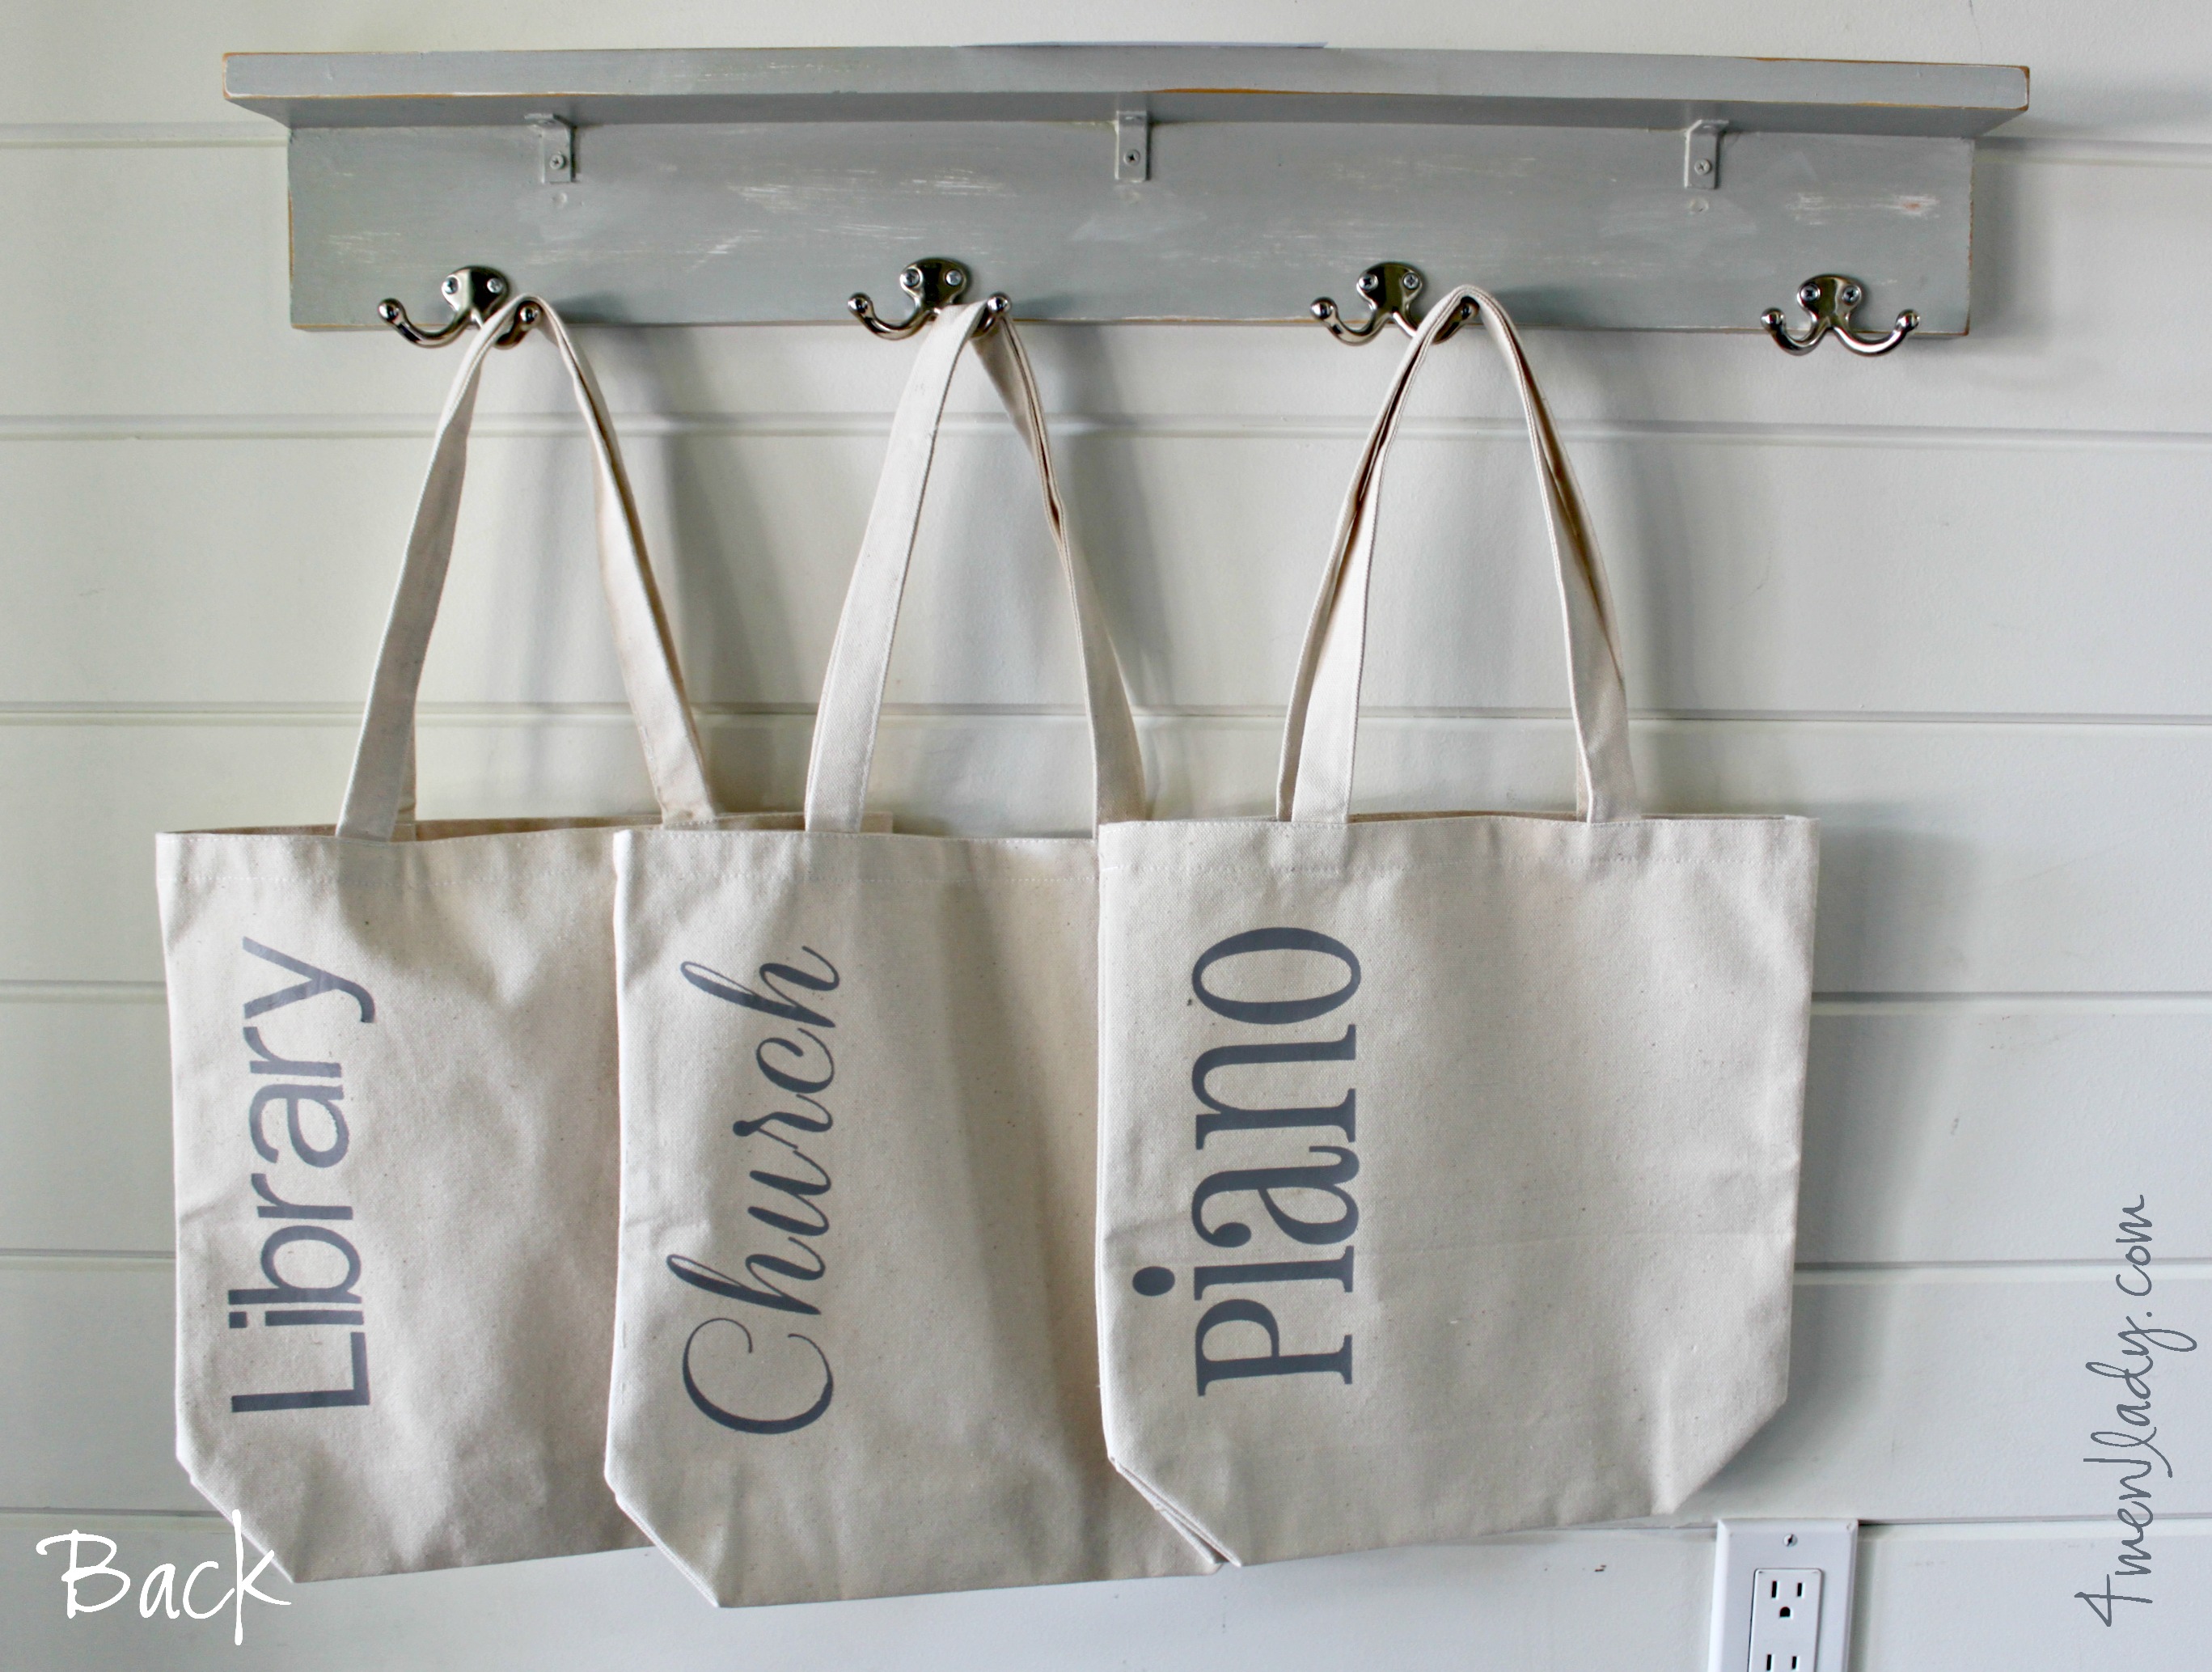 Personalized tote bags made with Cricut Explore (and a breast story).